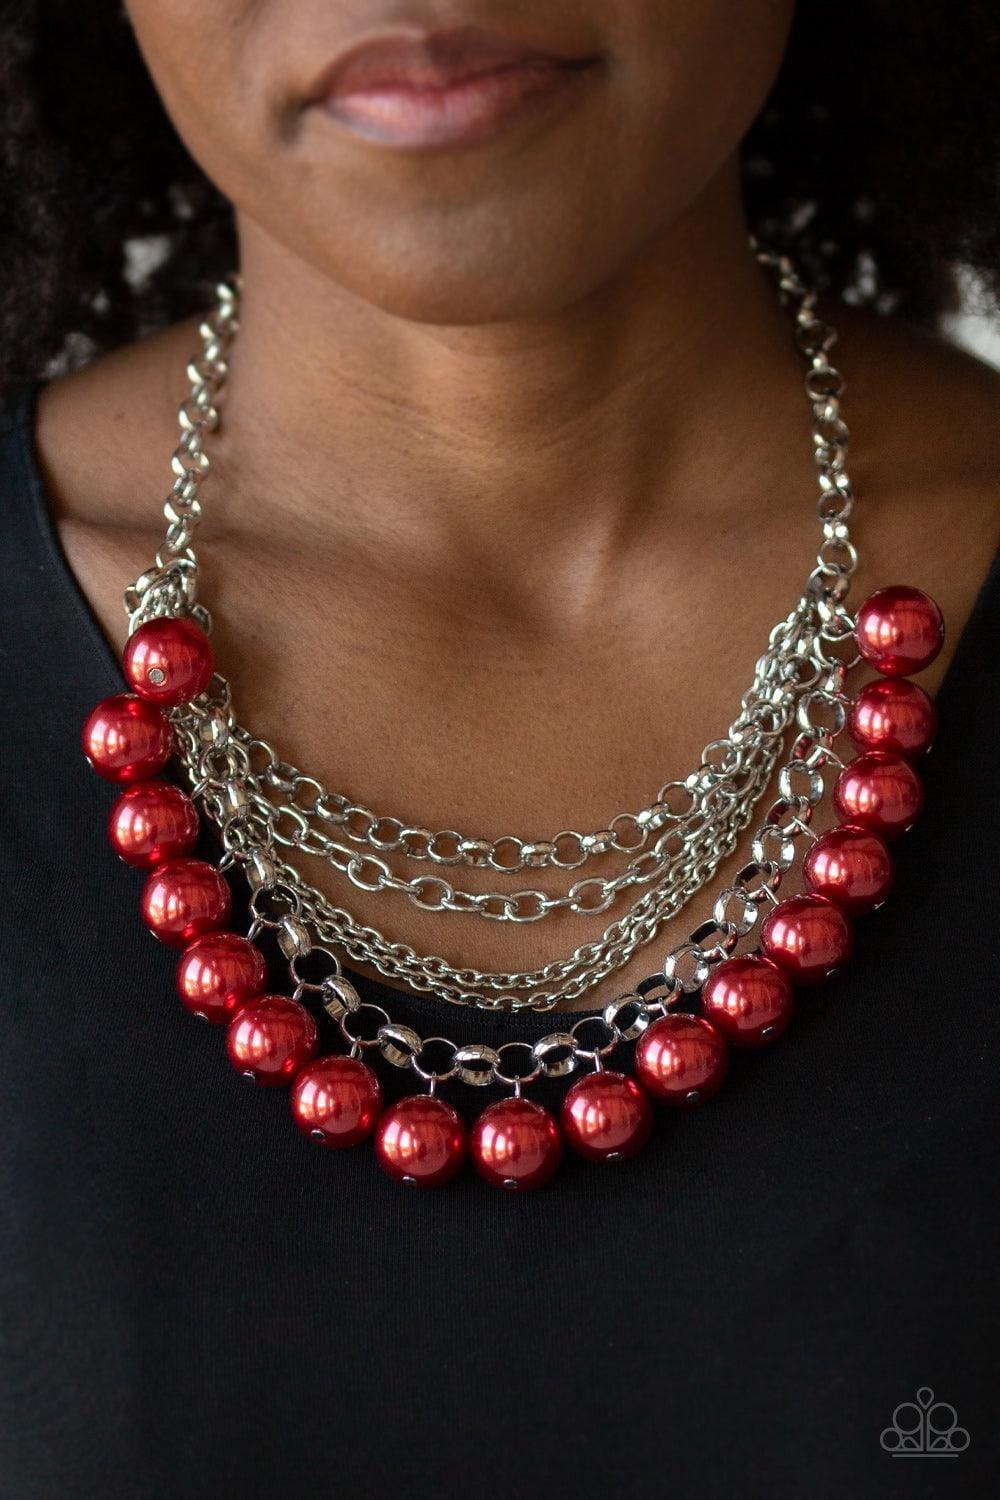 Paparazzi Accessories - One-way Wall Street - Red Necklace - Bling by JessieK